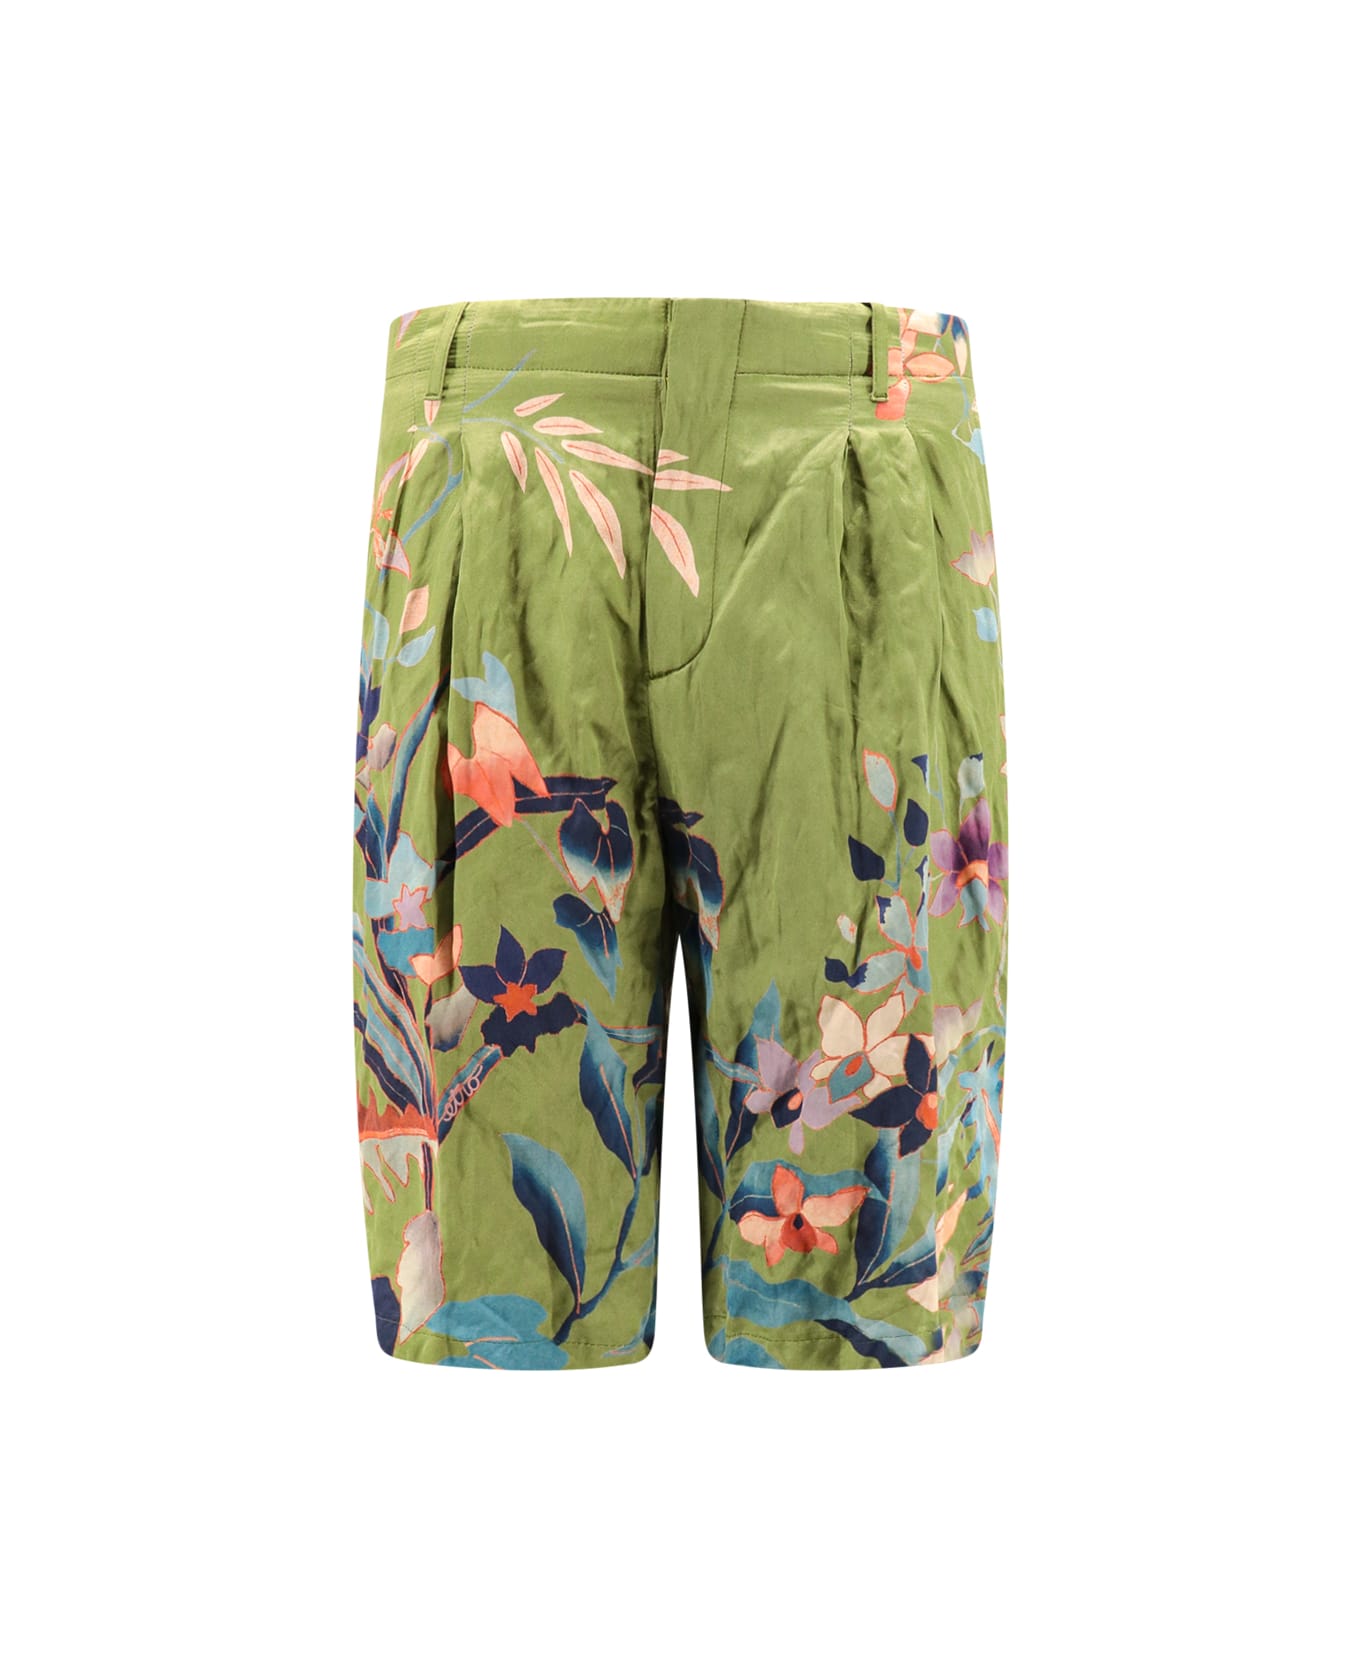 Etro Bermuda Shorts With Floral Print - Green